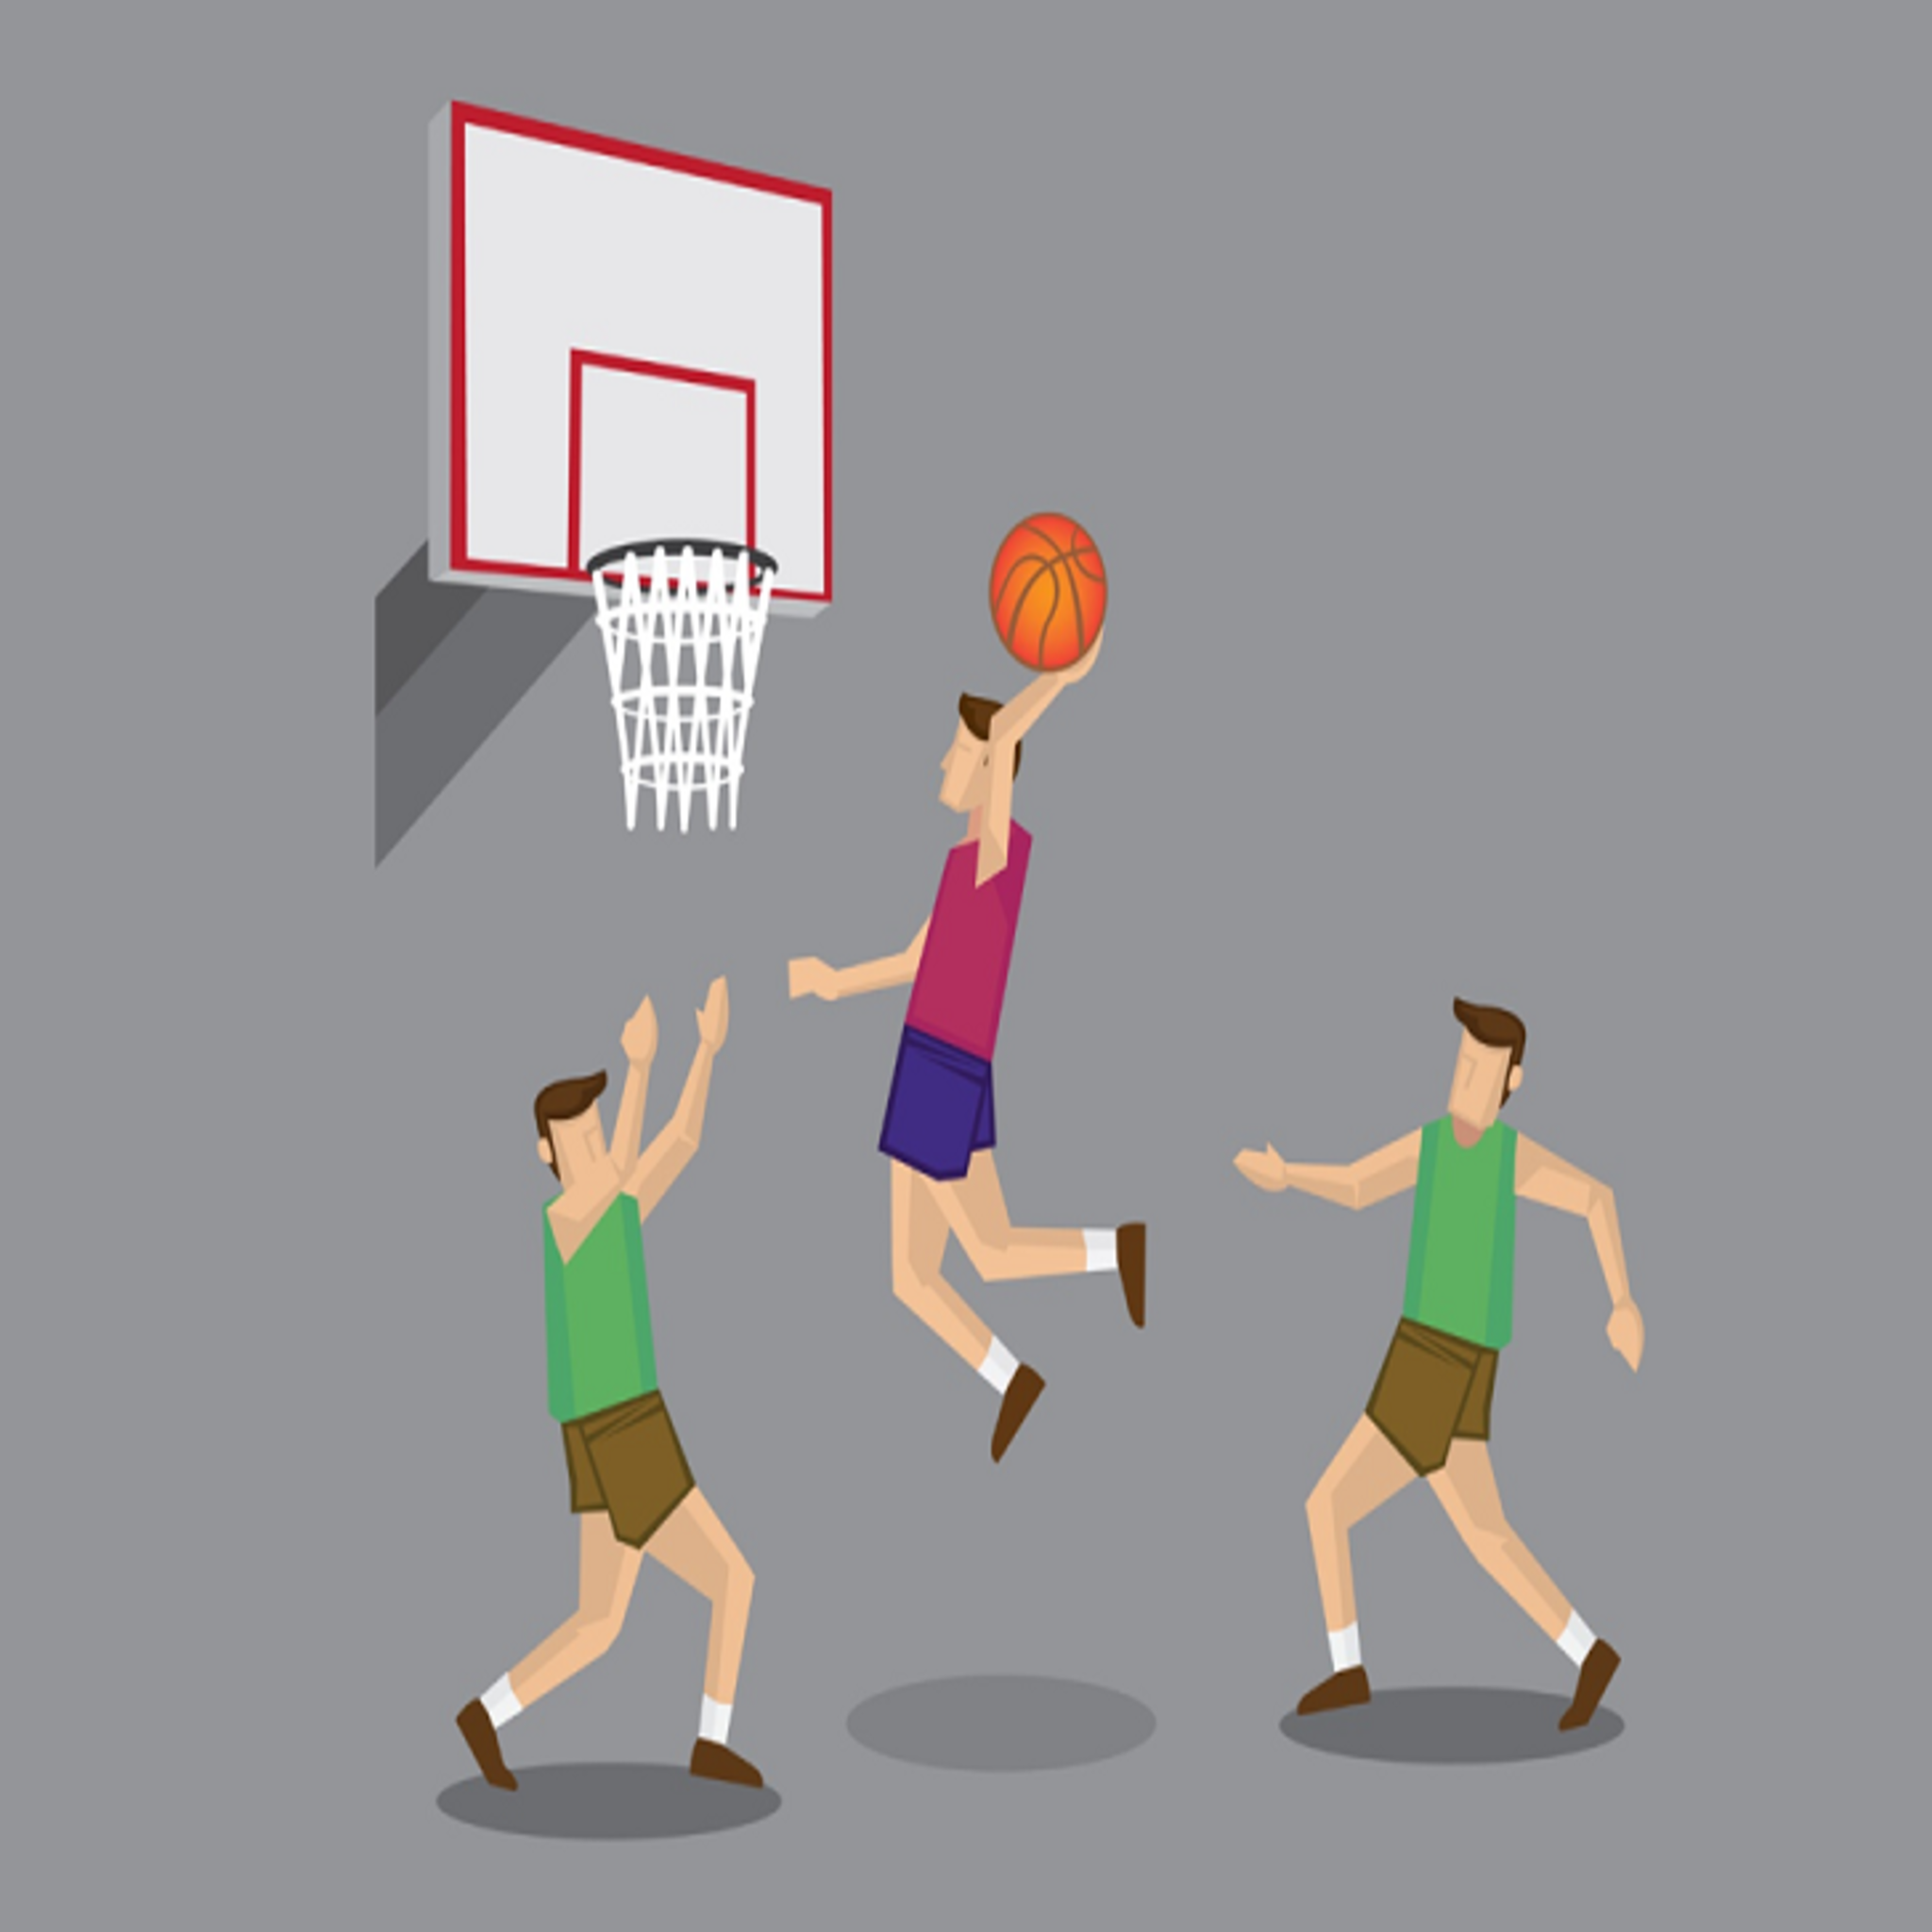 Unity Game Development - Build a Basketball Game